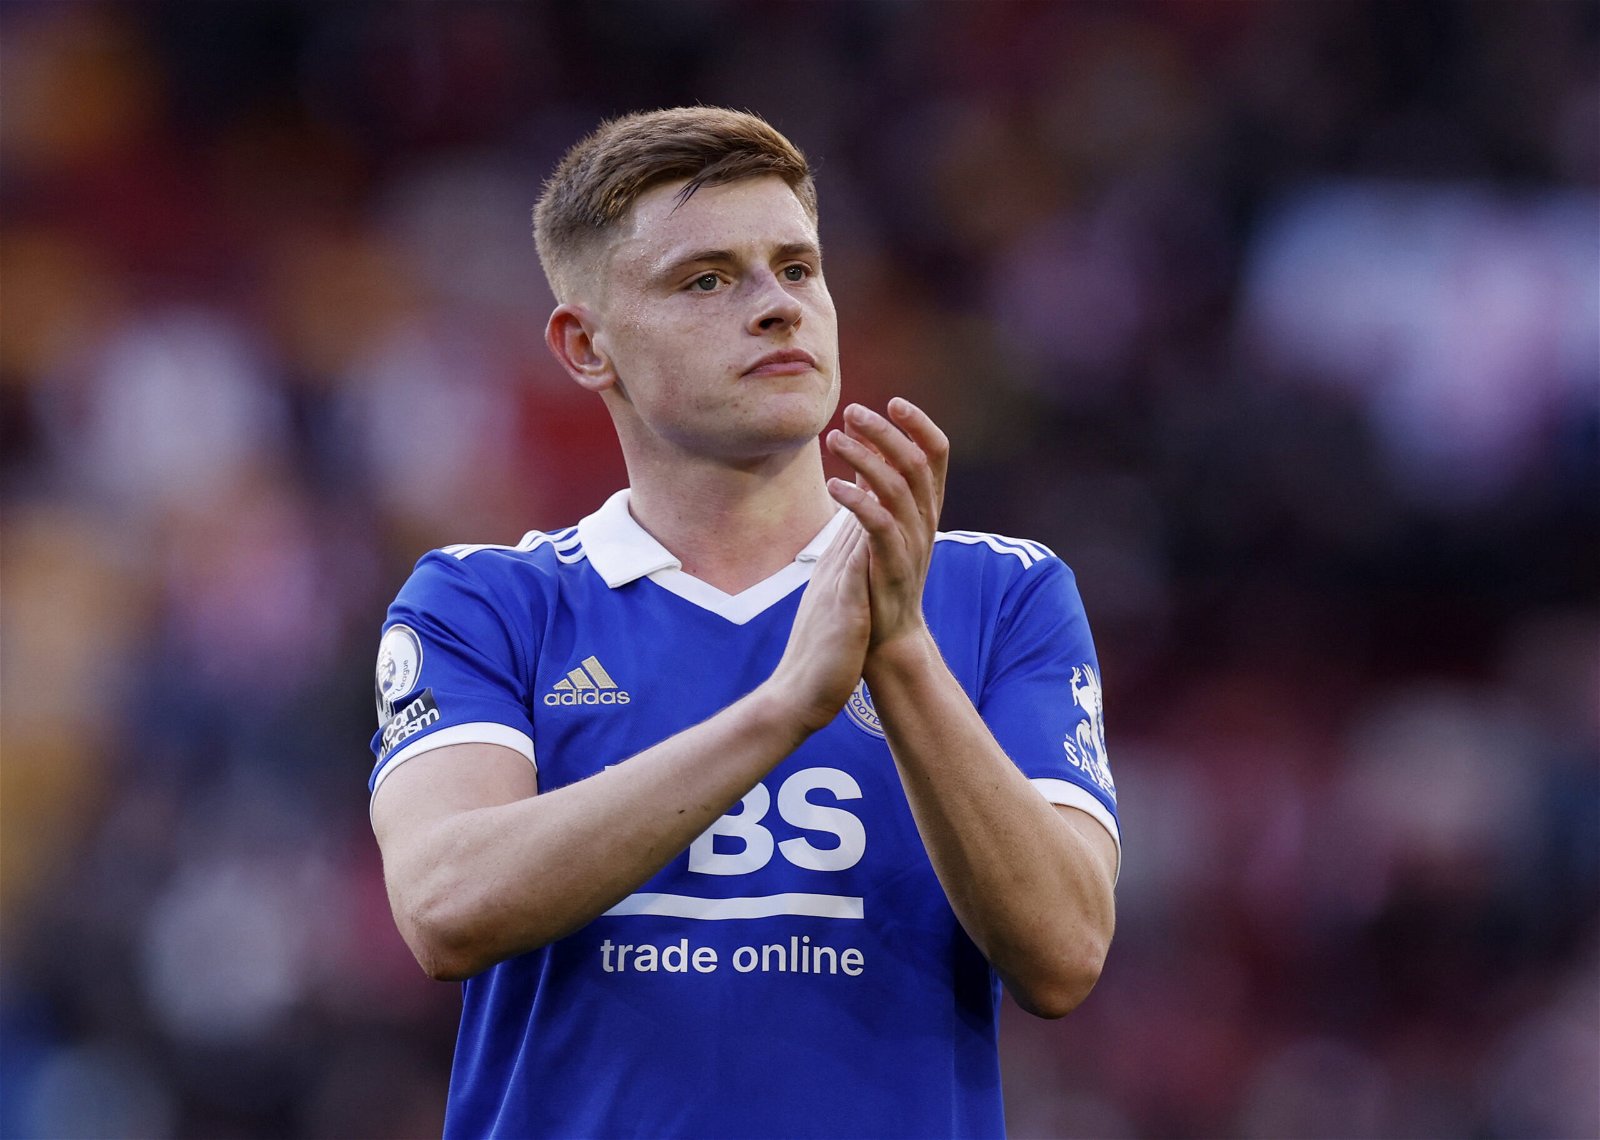 Leicester City's Harvey Barnes applauds fans after the match